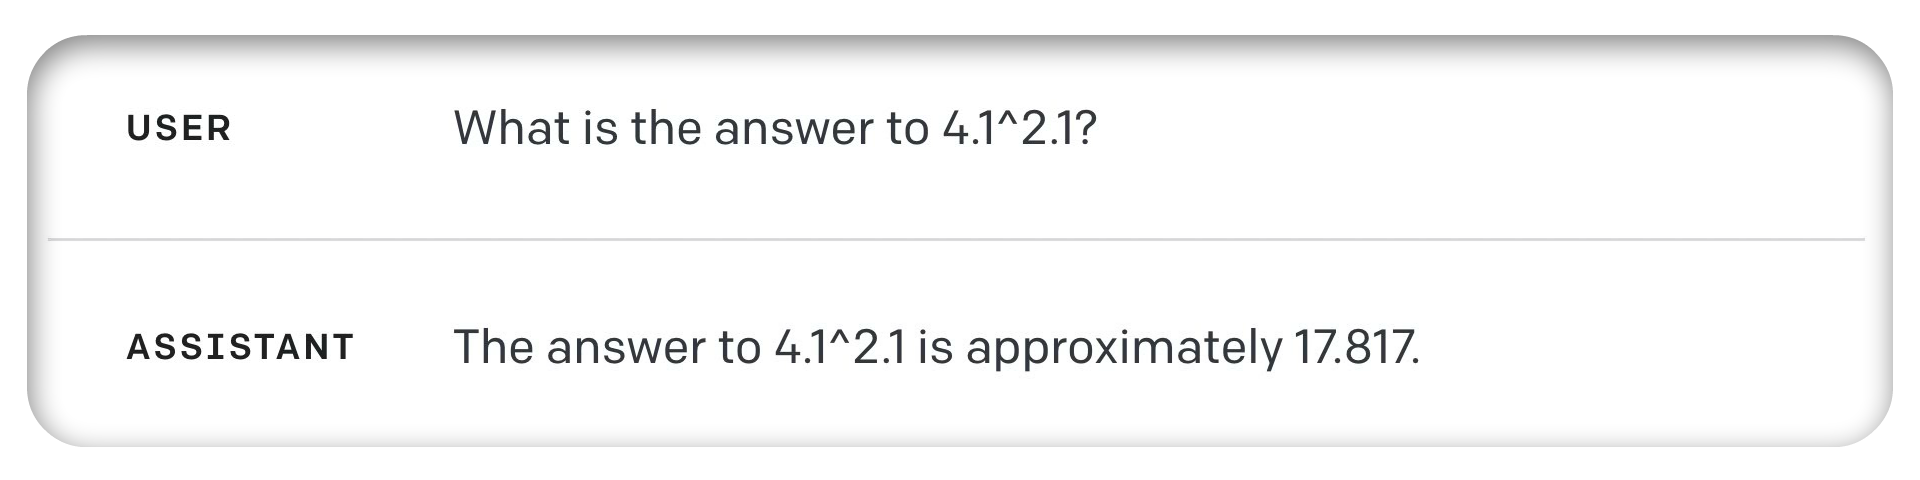 Asking GPT-4 to perform a simple calculation often results in an incorrect answer. A simple calculator can perform this same calculation without issue.